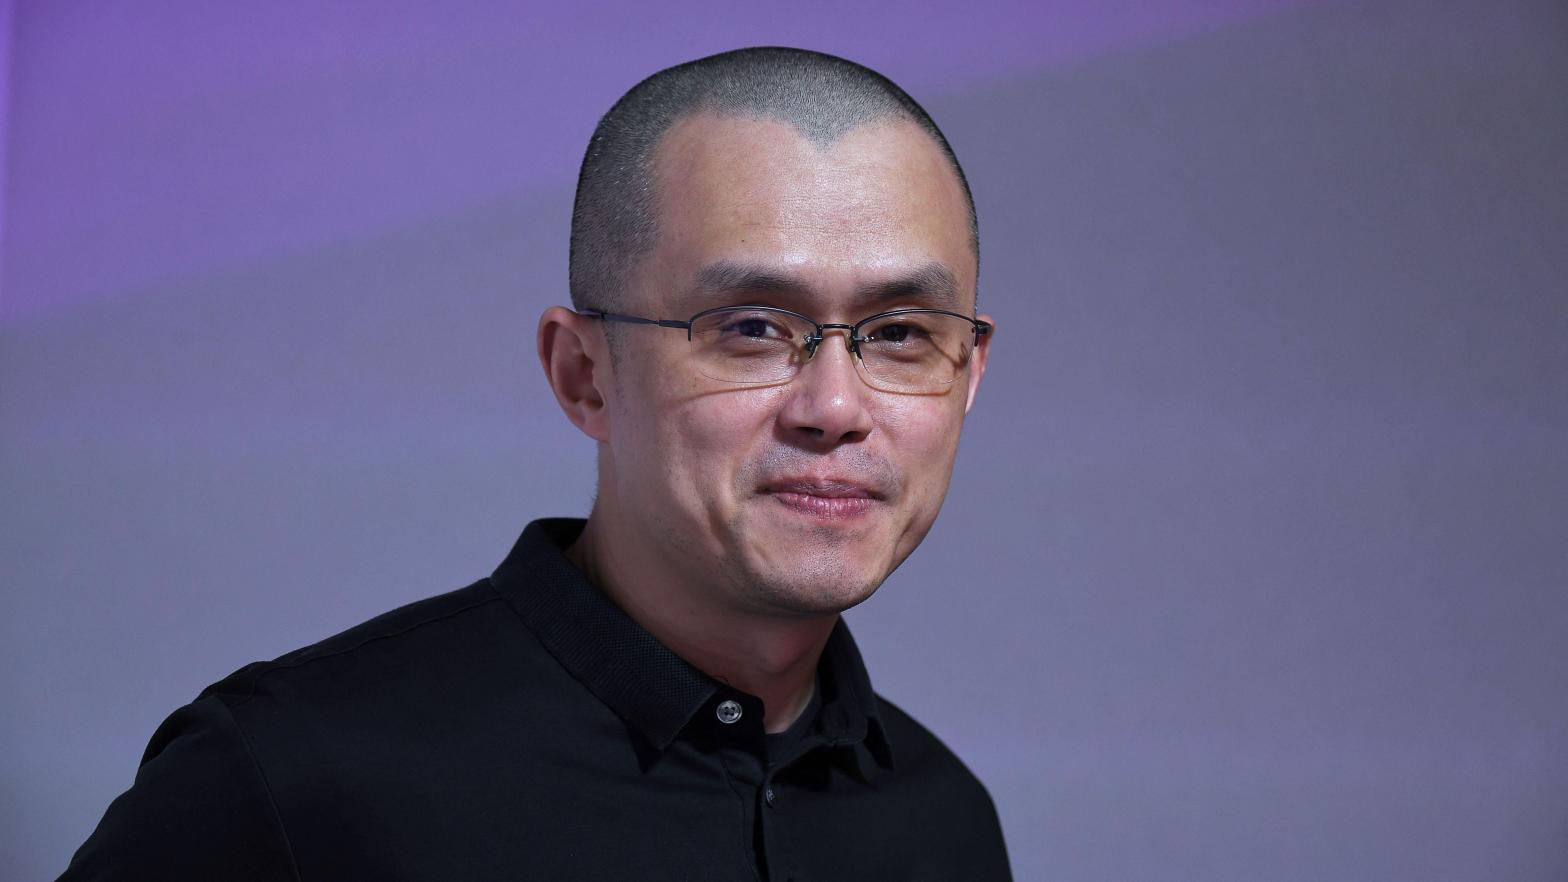 Binance founder Changpeng Zhao, also known as CZ, poses during an interview at the technology startups and innovation fair in Paris on May 16, 2022. (Photo: Eric Piermont, Getty Images)